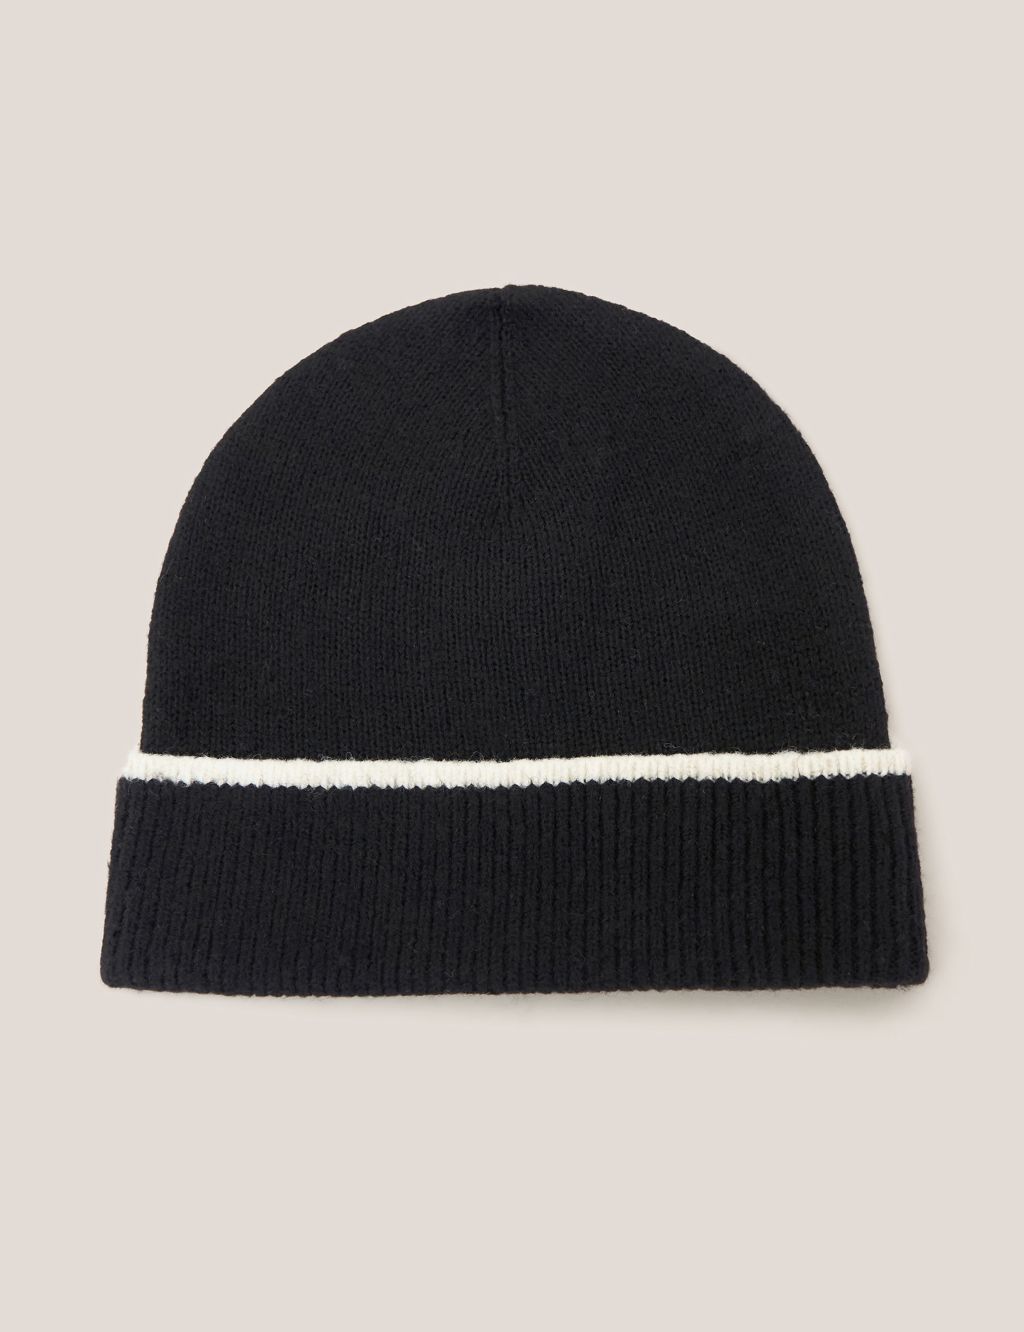 Knitted Turn Up Beanie Hat image 1